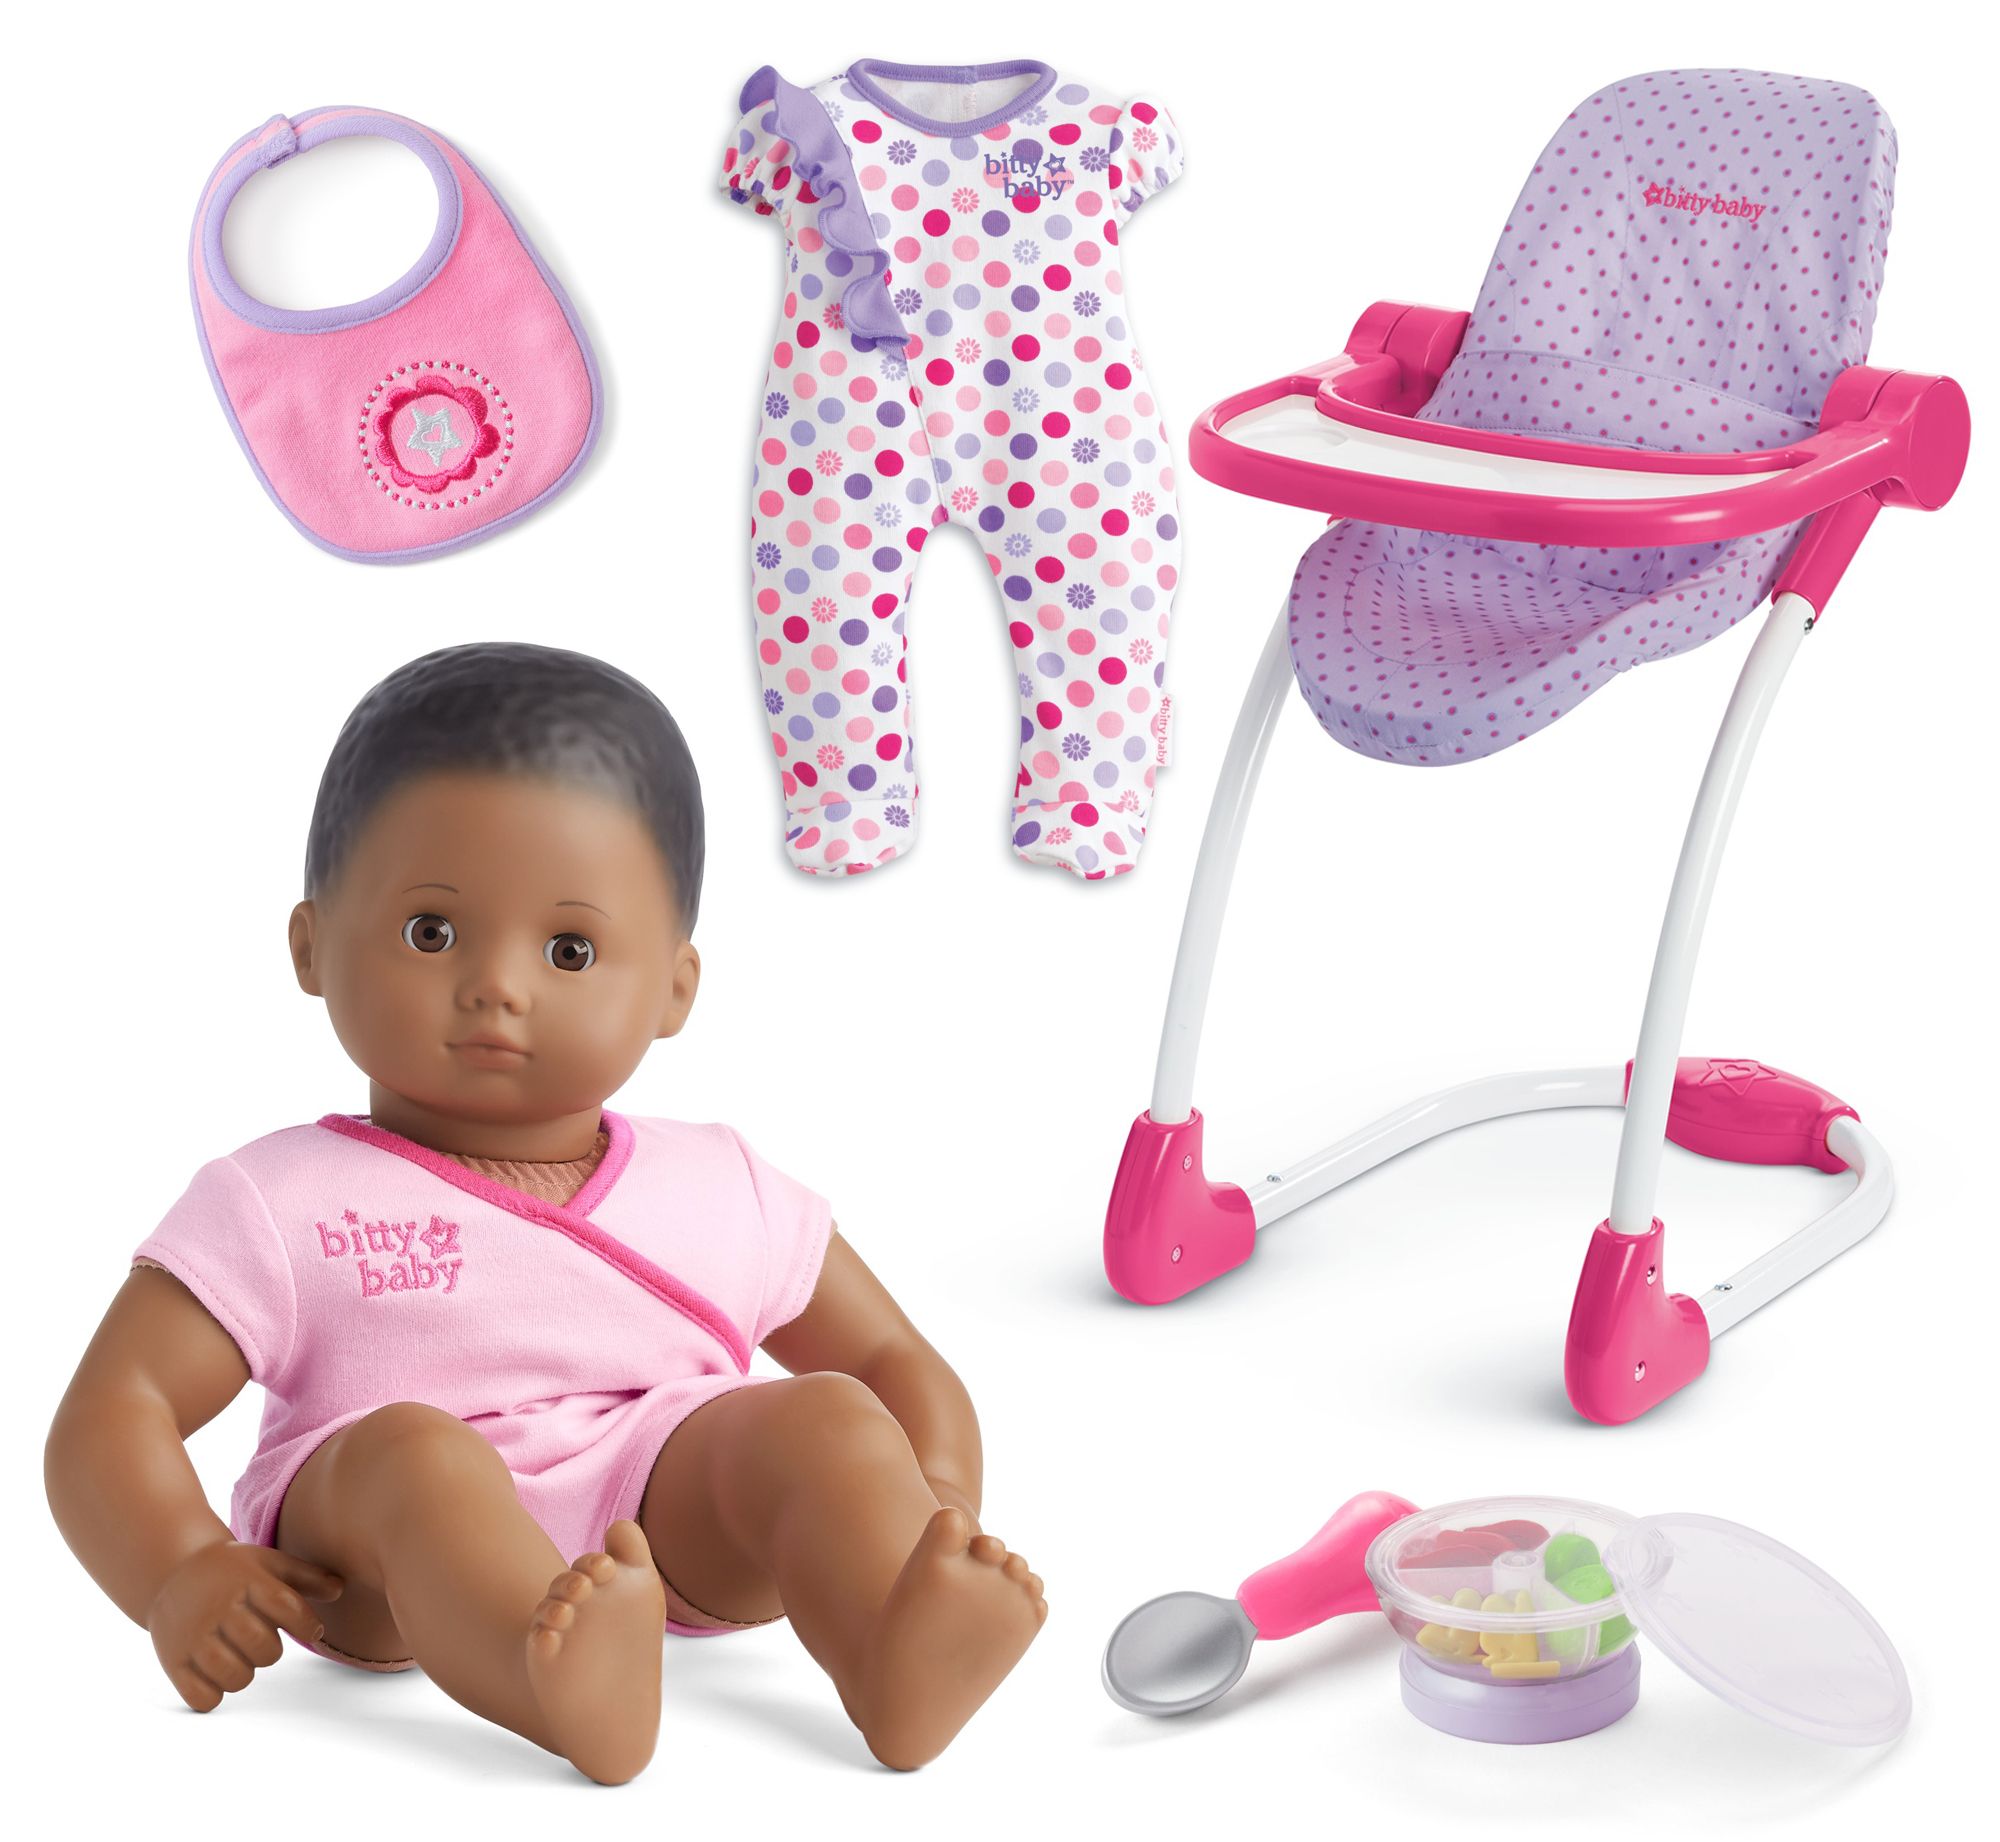 American Girl Baby 15" Doll with High Chair & Outfits - QVC.com